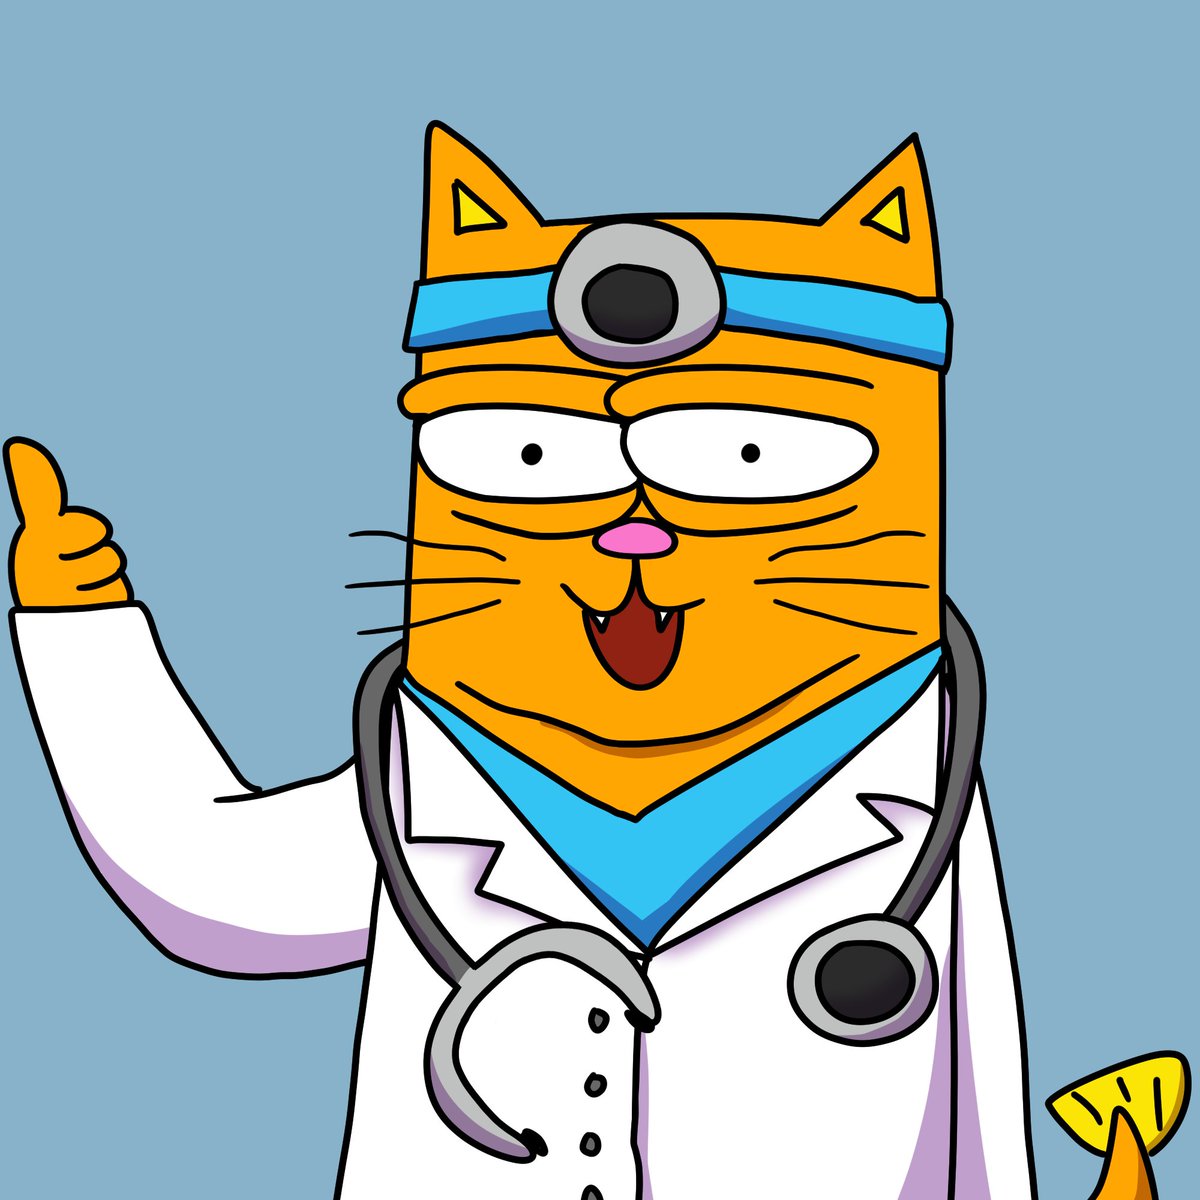 In a world torn apart by conflict, where the innocent often suffered the most, there was a remarkable cat named Dr. Finnegan Fish—known to friends and admirers as Dr. Finn. This extraordinary feline possessed an unparalleled gift: the ability to transform into a skilled and